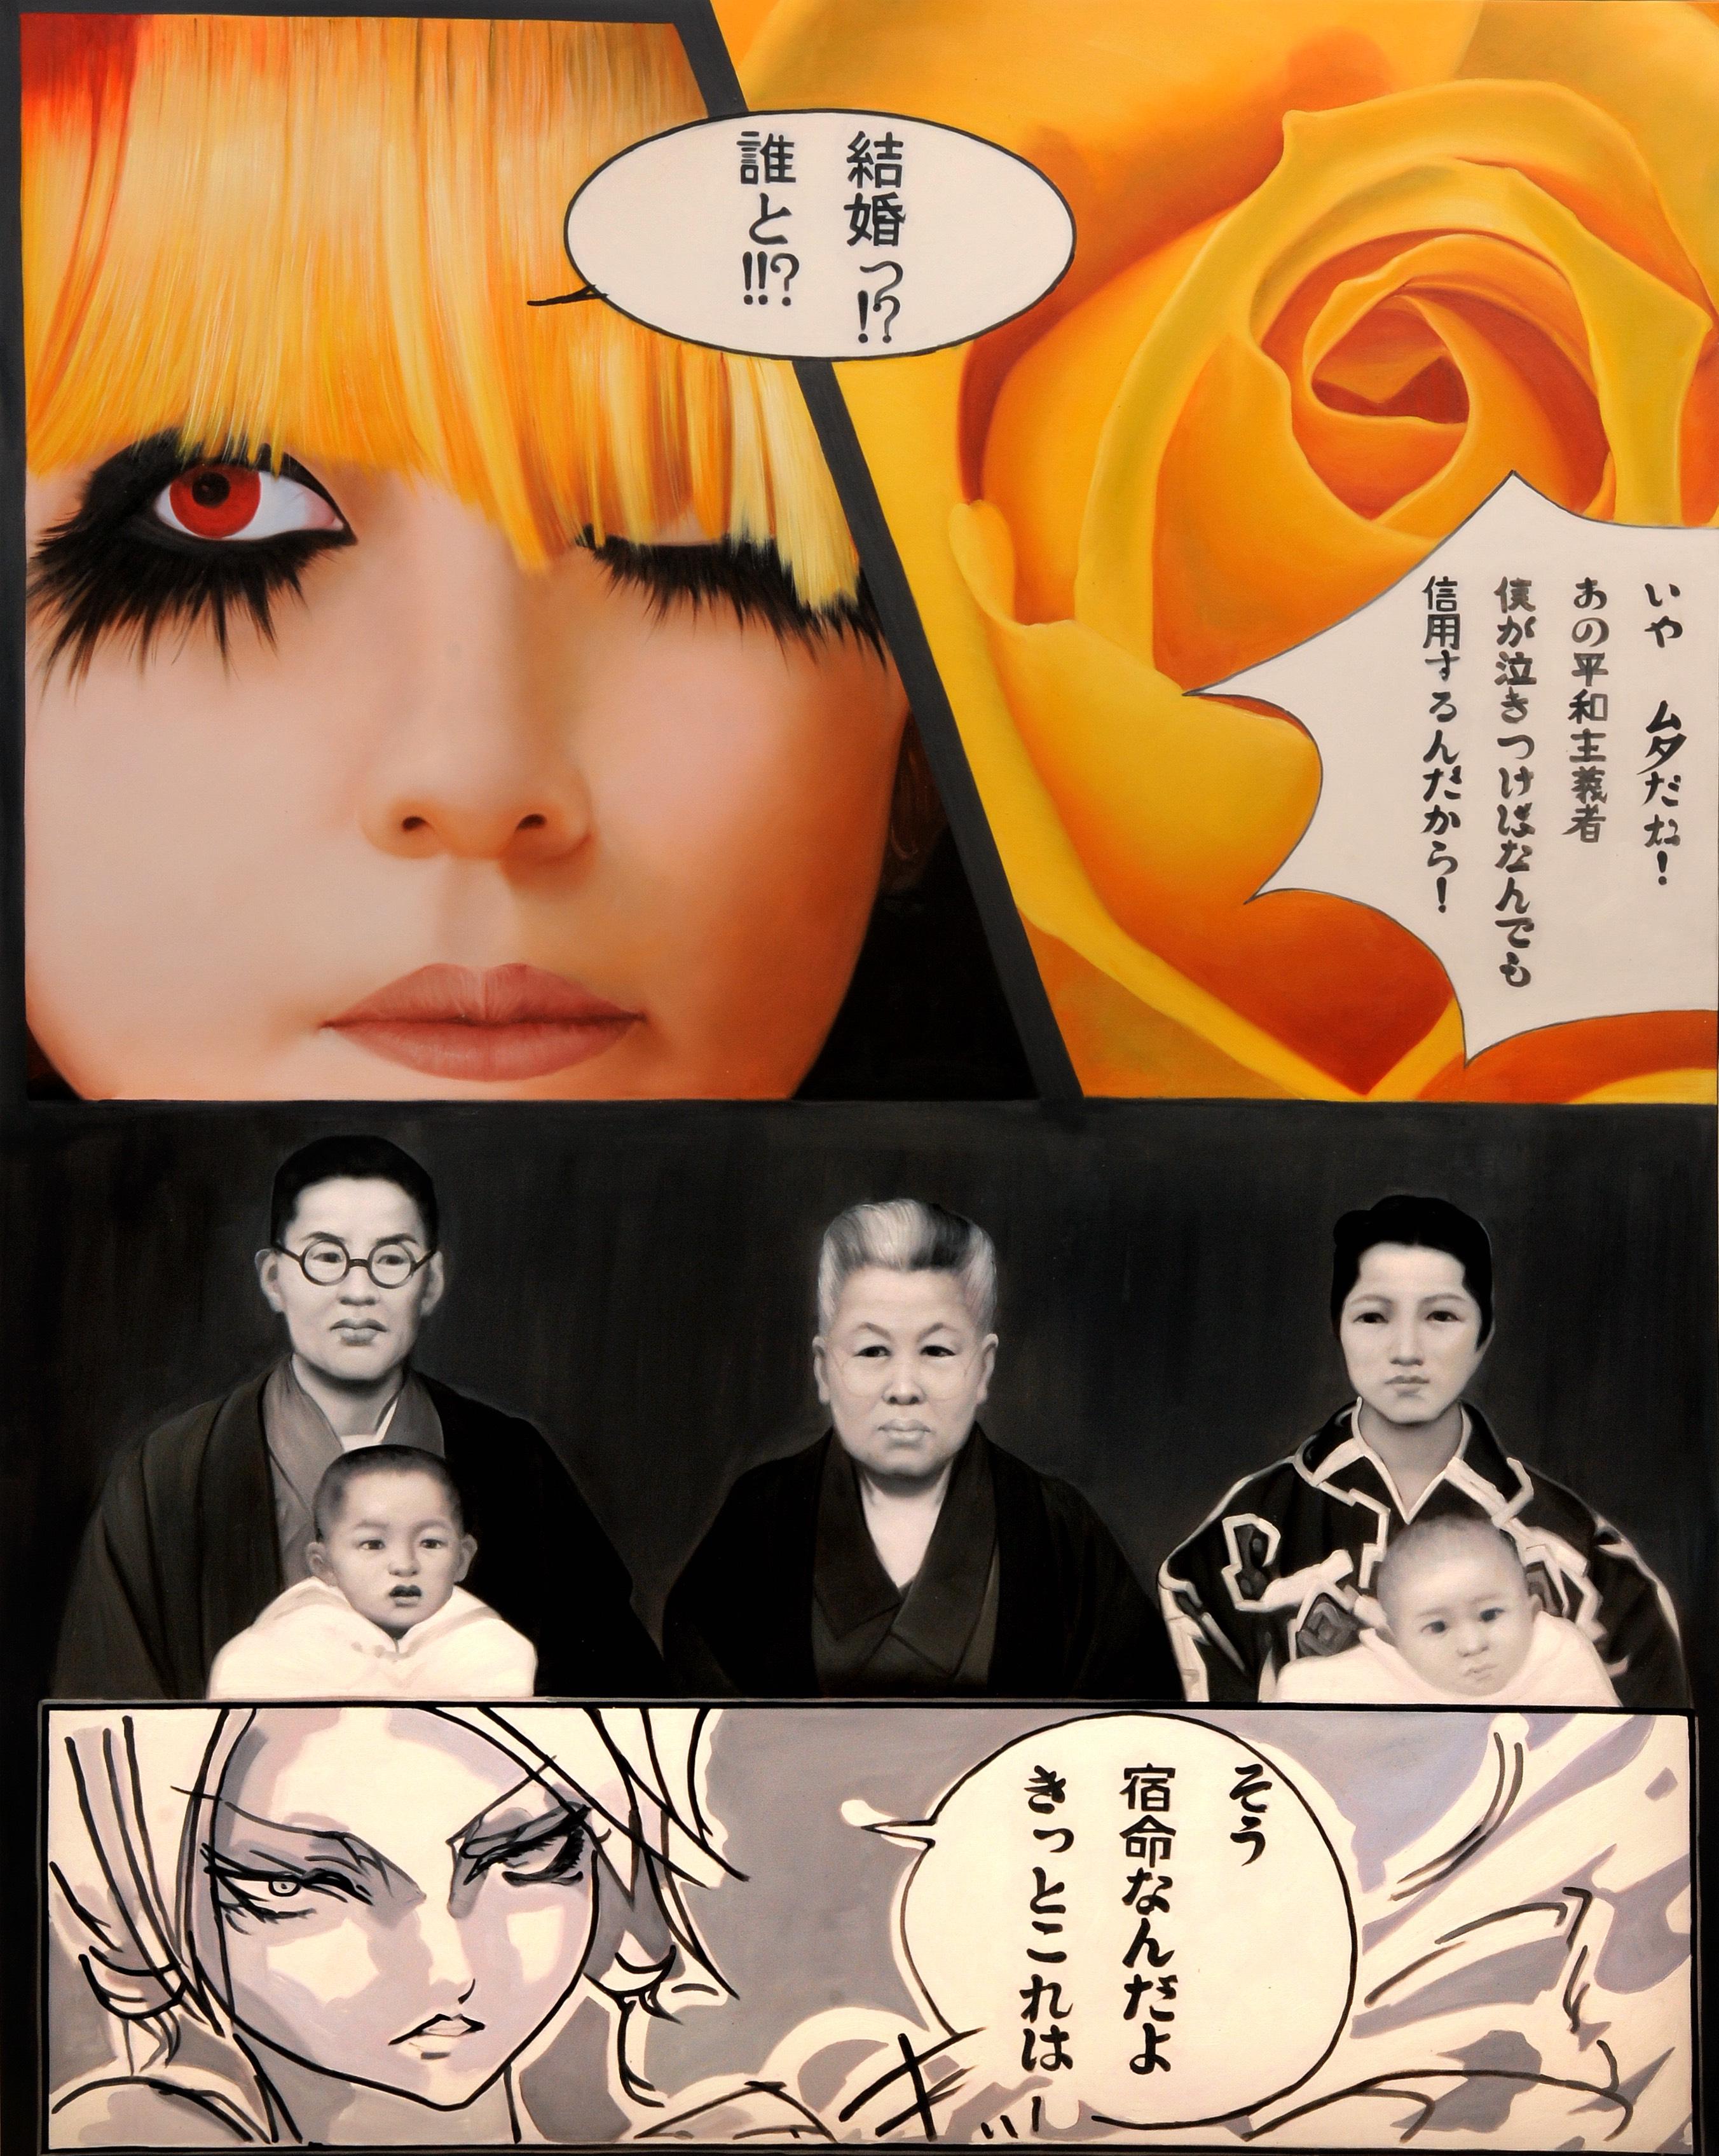 Black Eyes and Yellow Hair : Kokoro in Color, Expressions of Tokyo's Soul - Painting by JIMMY YOSHIMURA